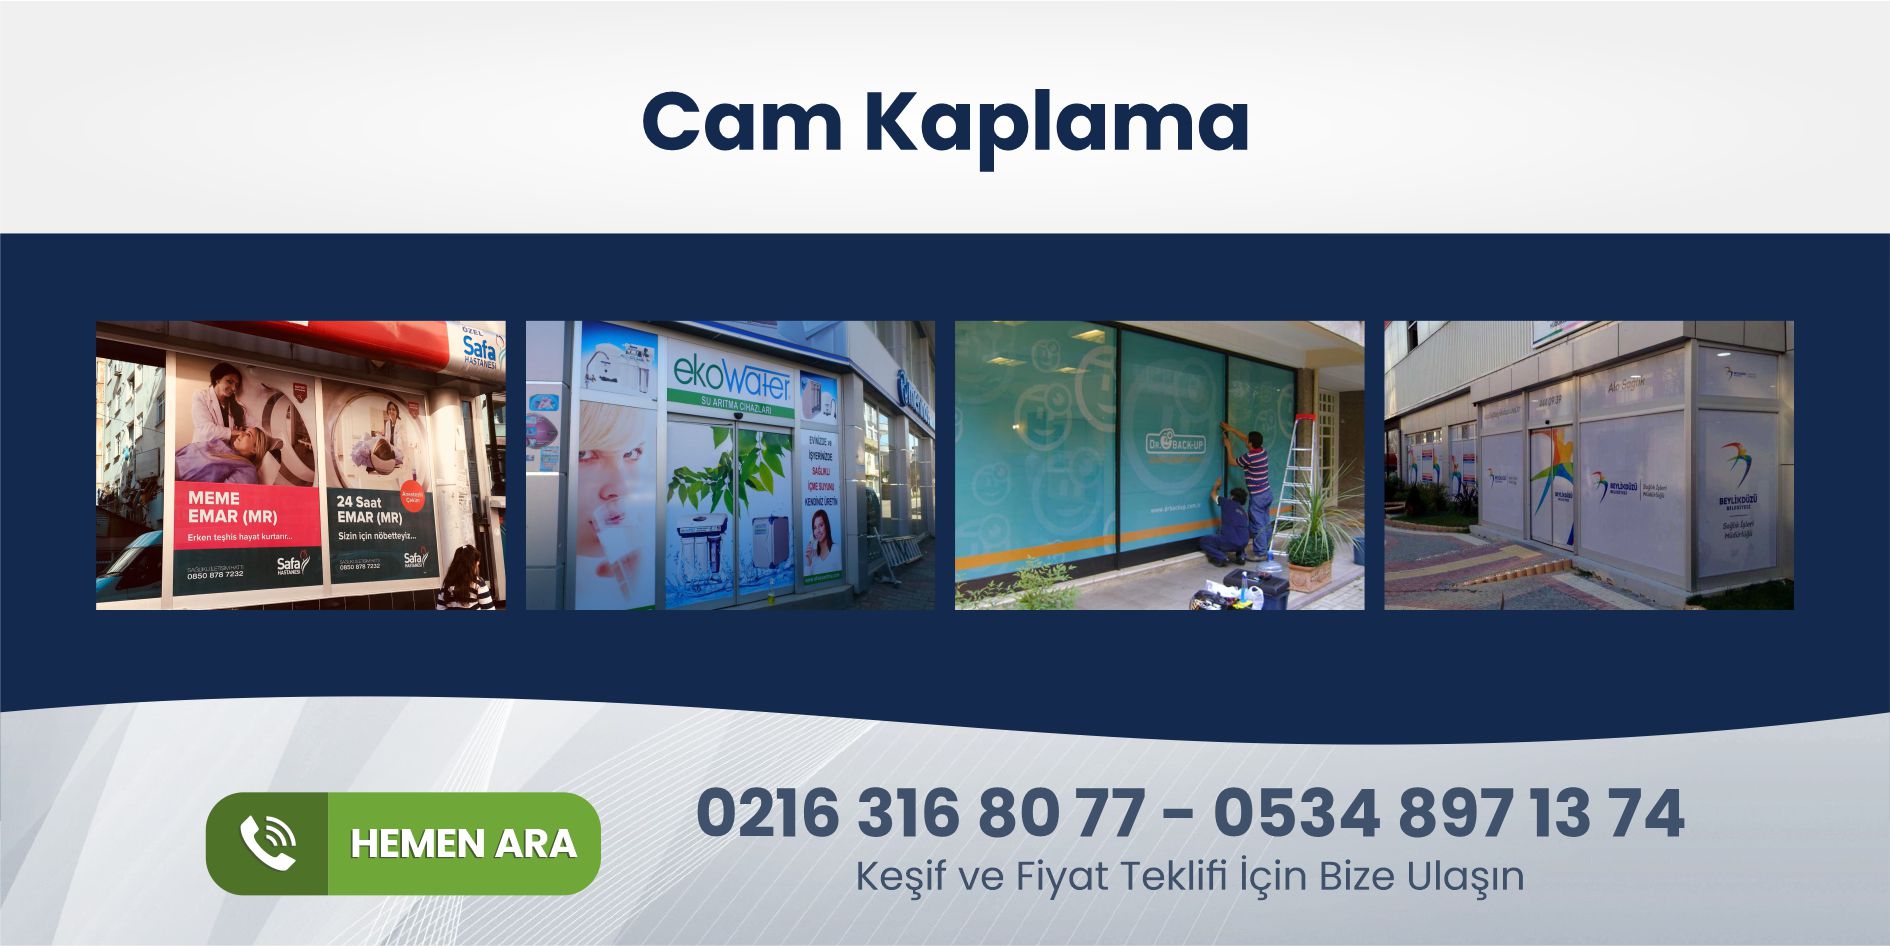 You are currently viewing Sancaktepe One Way Vision Cam Kaplama